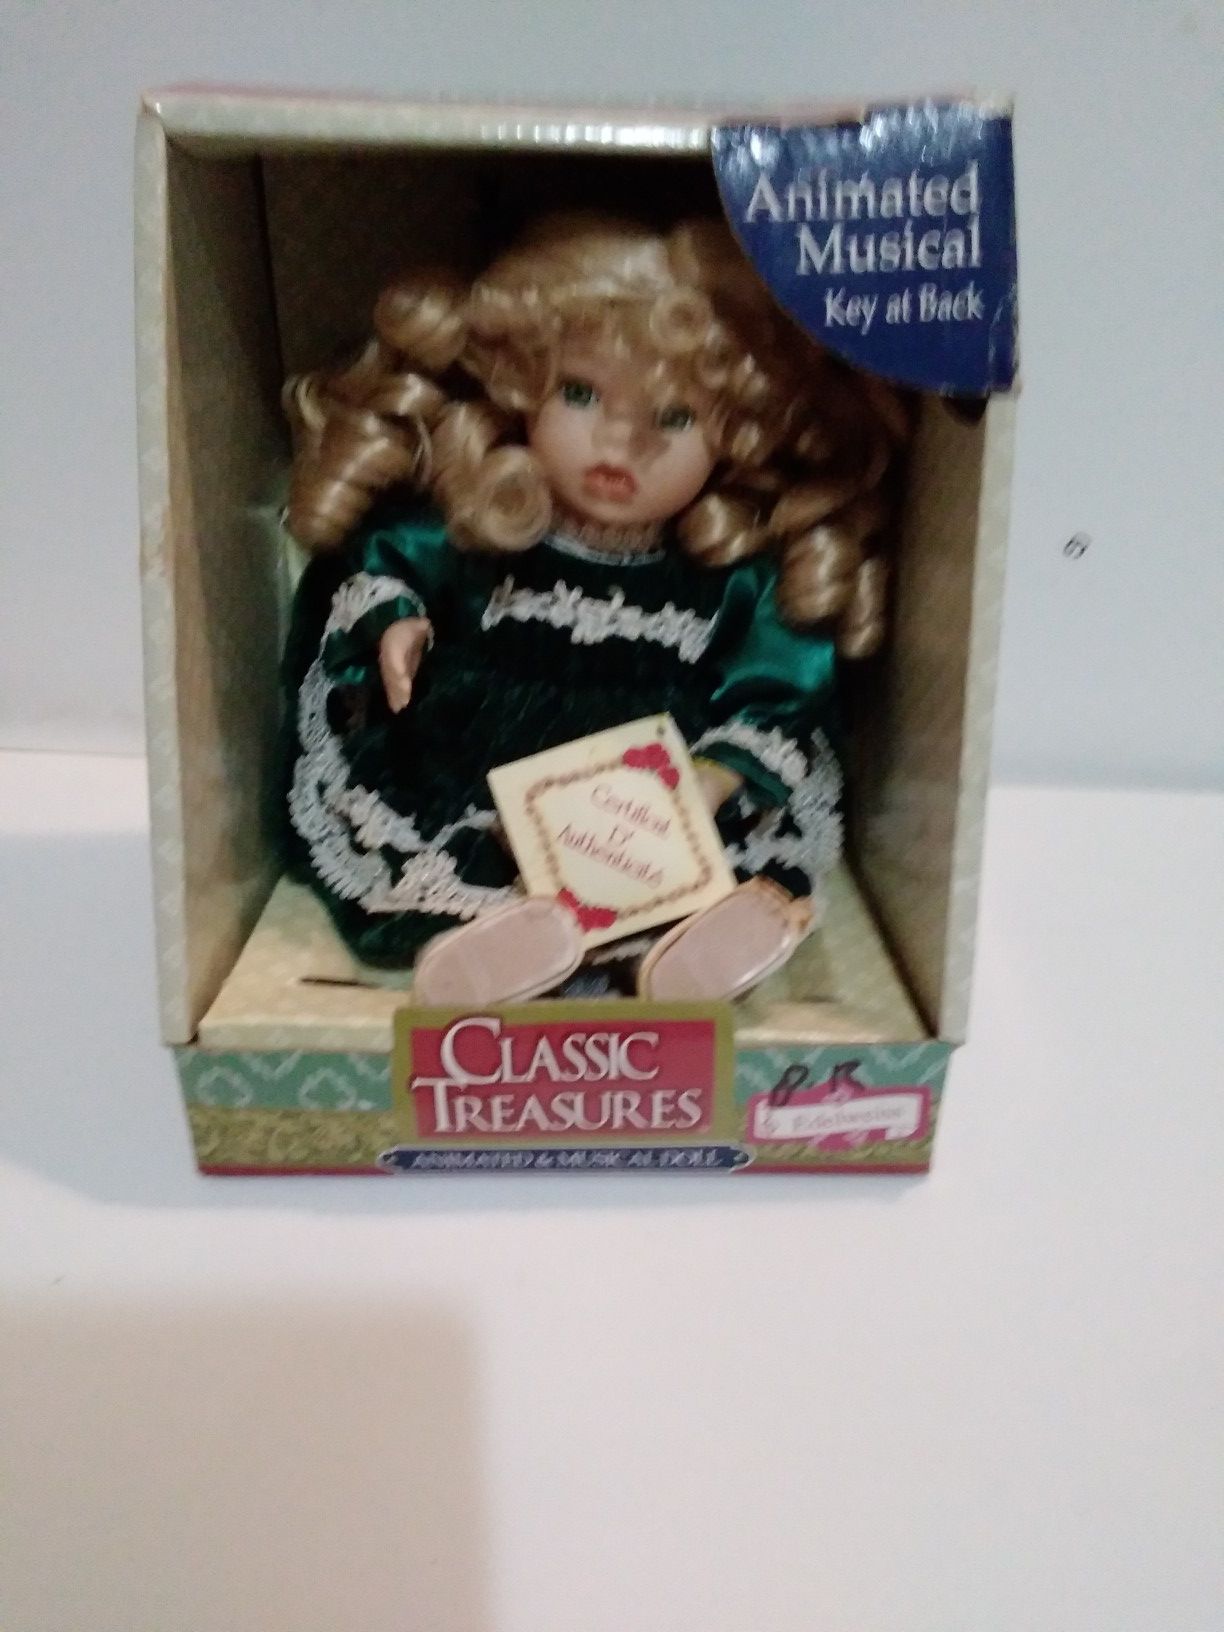 Classic treasures animated musical porcelain doll